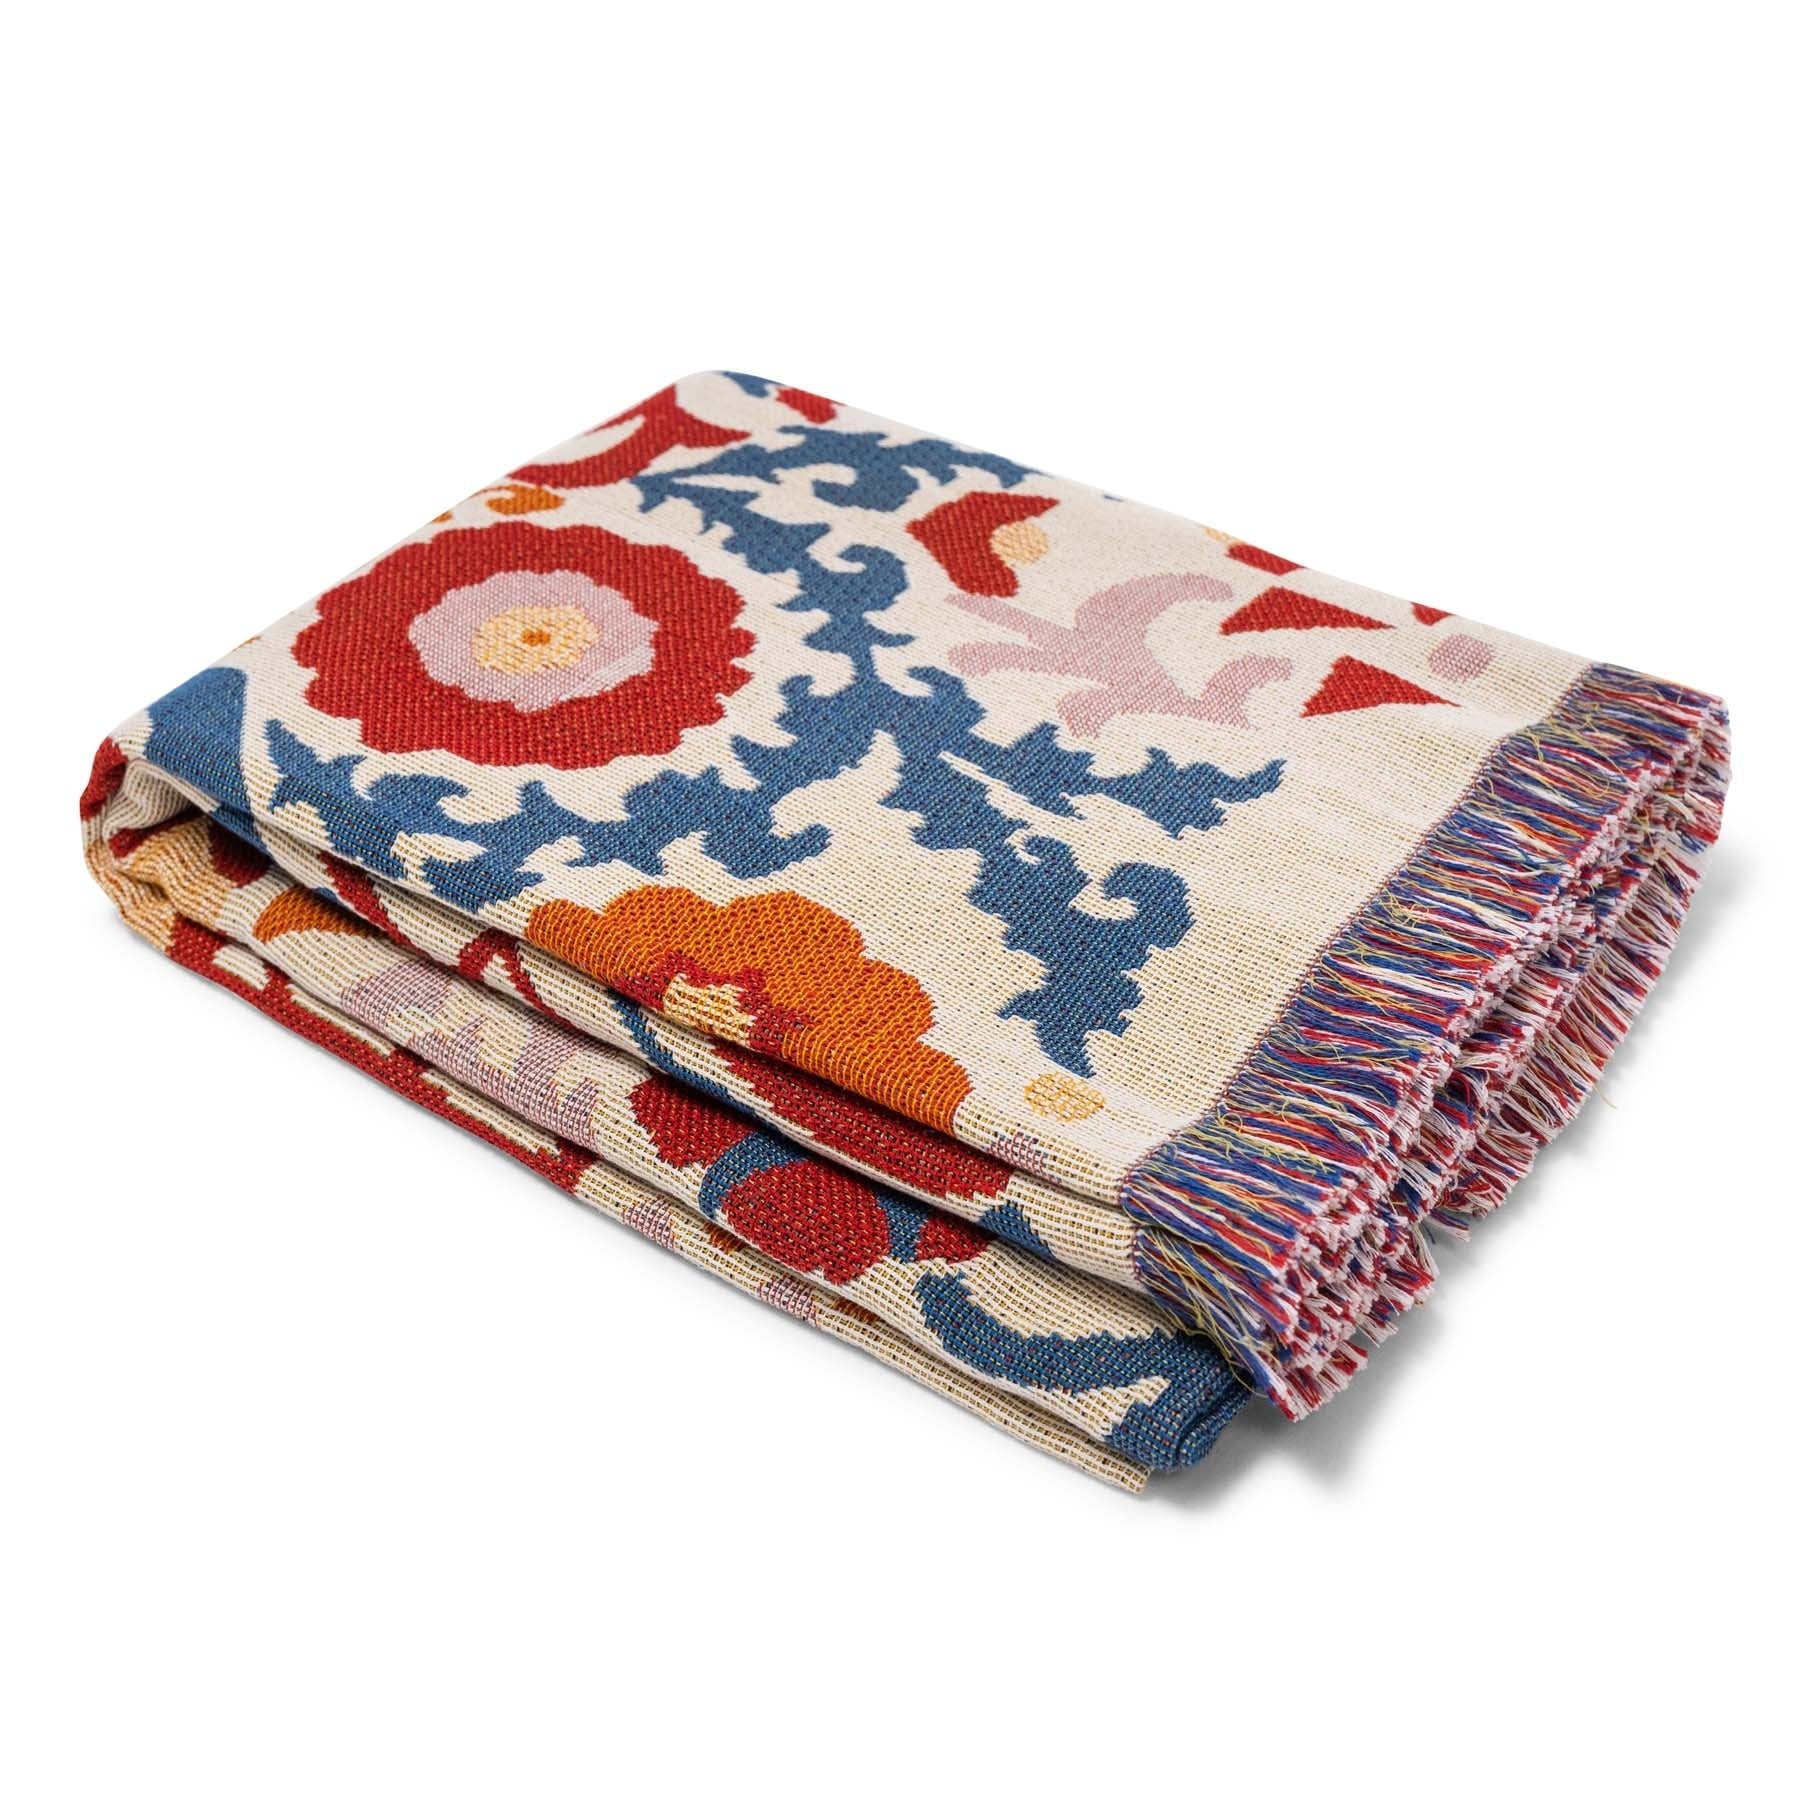 A Day in the Life' Woven Picnic Rug/Throw